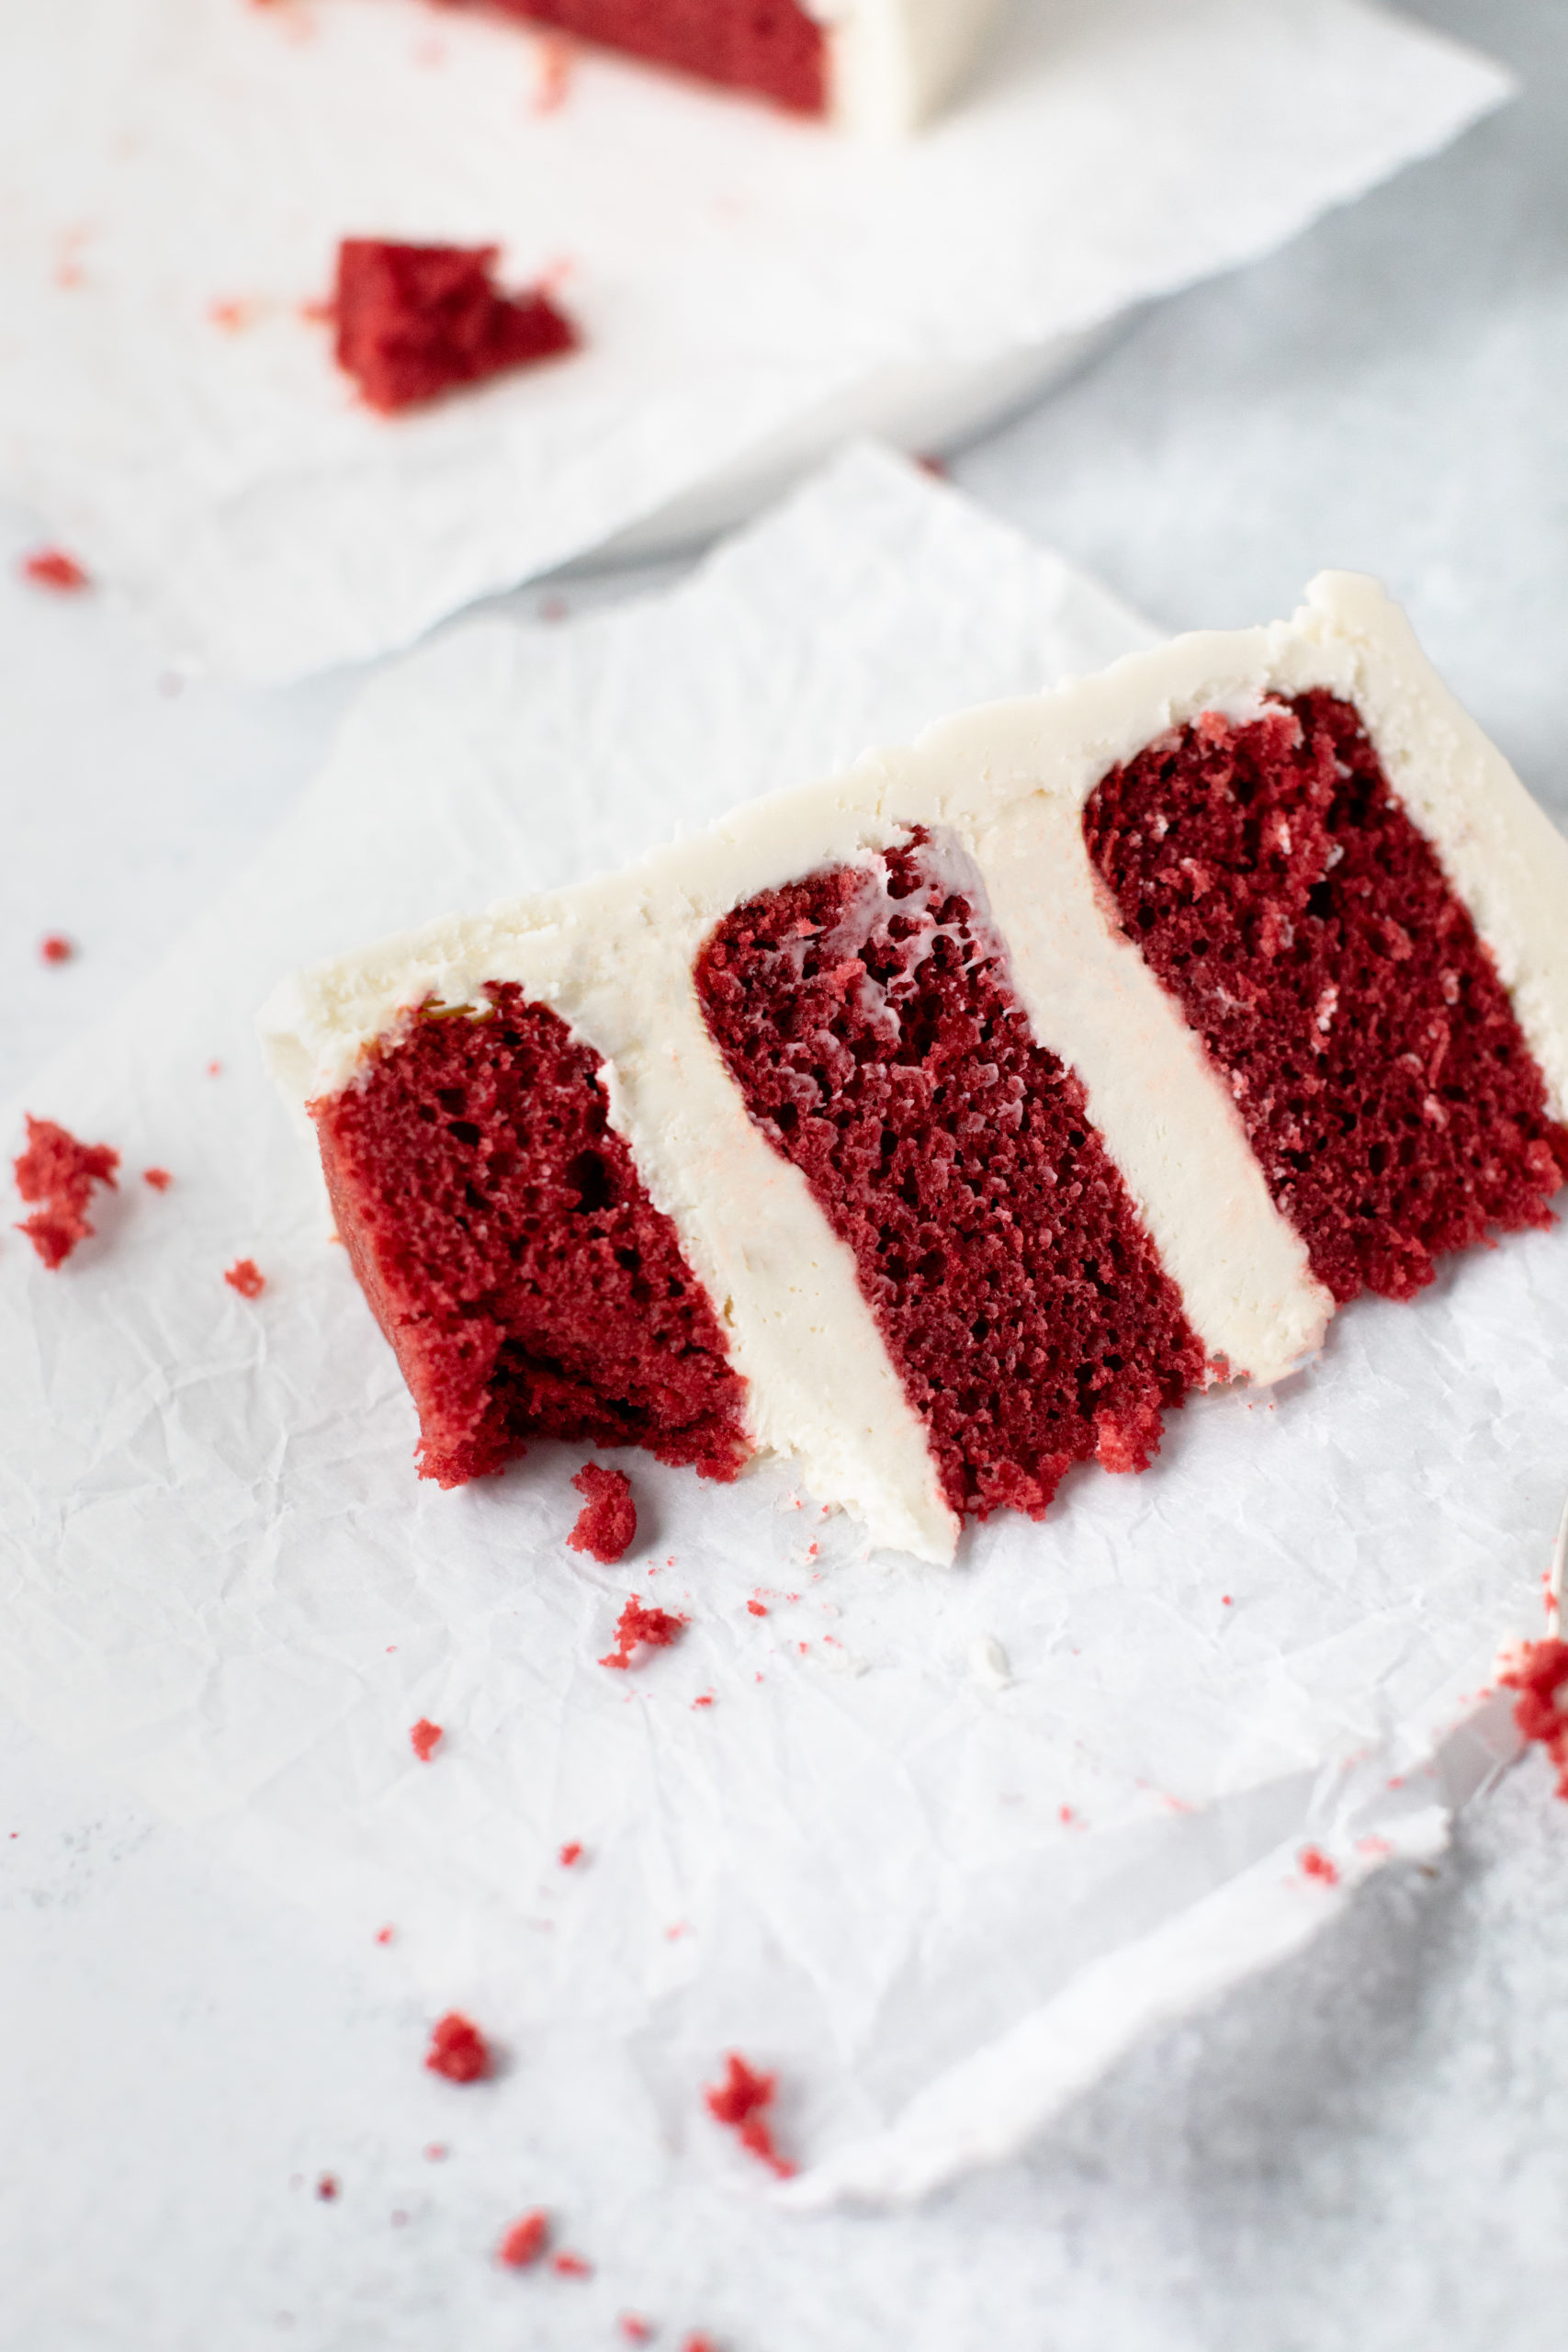 A slice of red velvet cake with layers of cream cheese frosting.